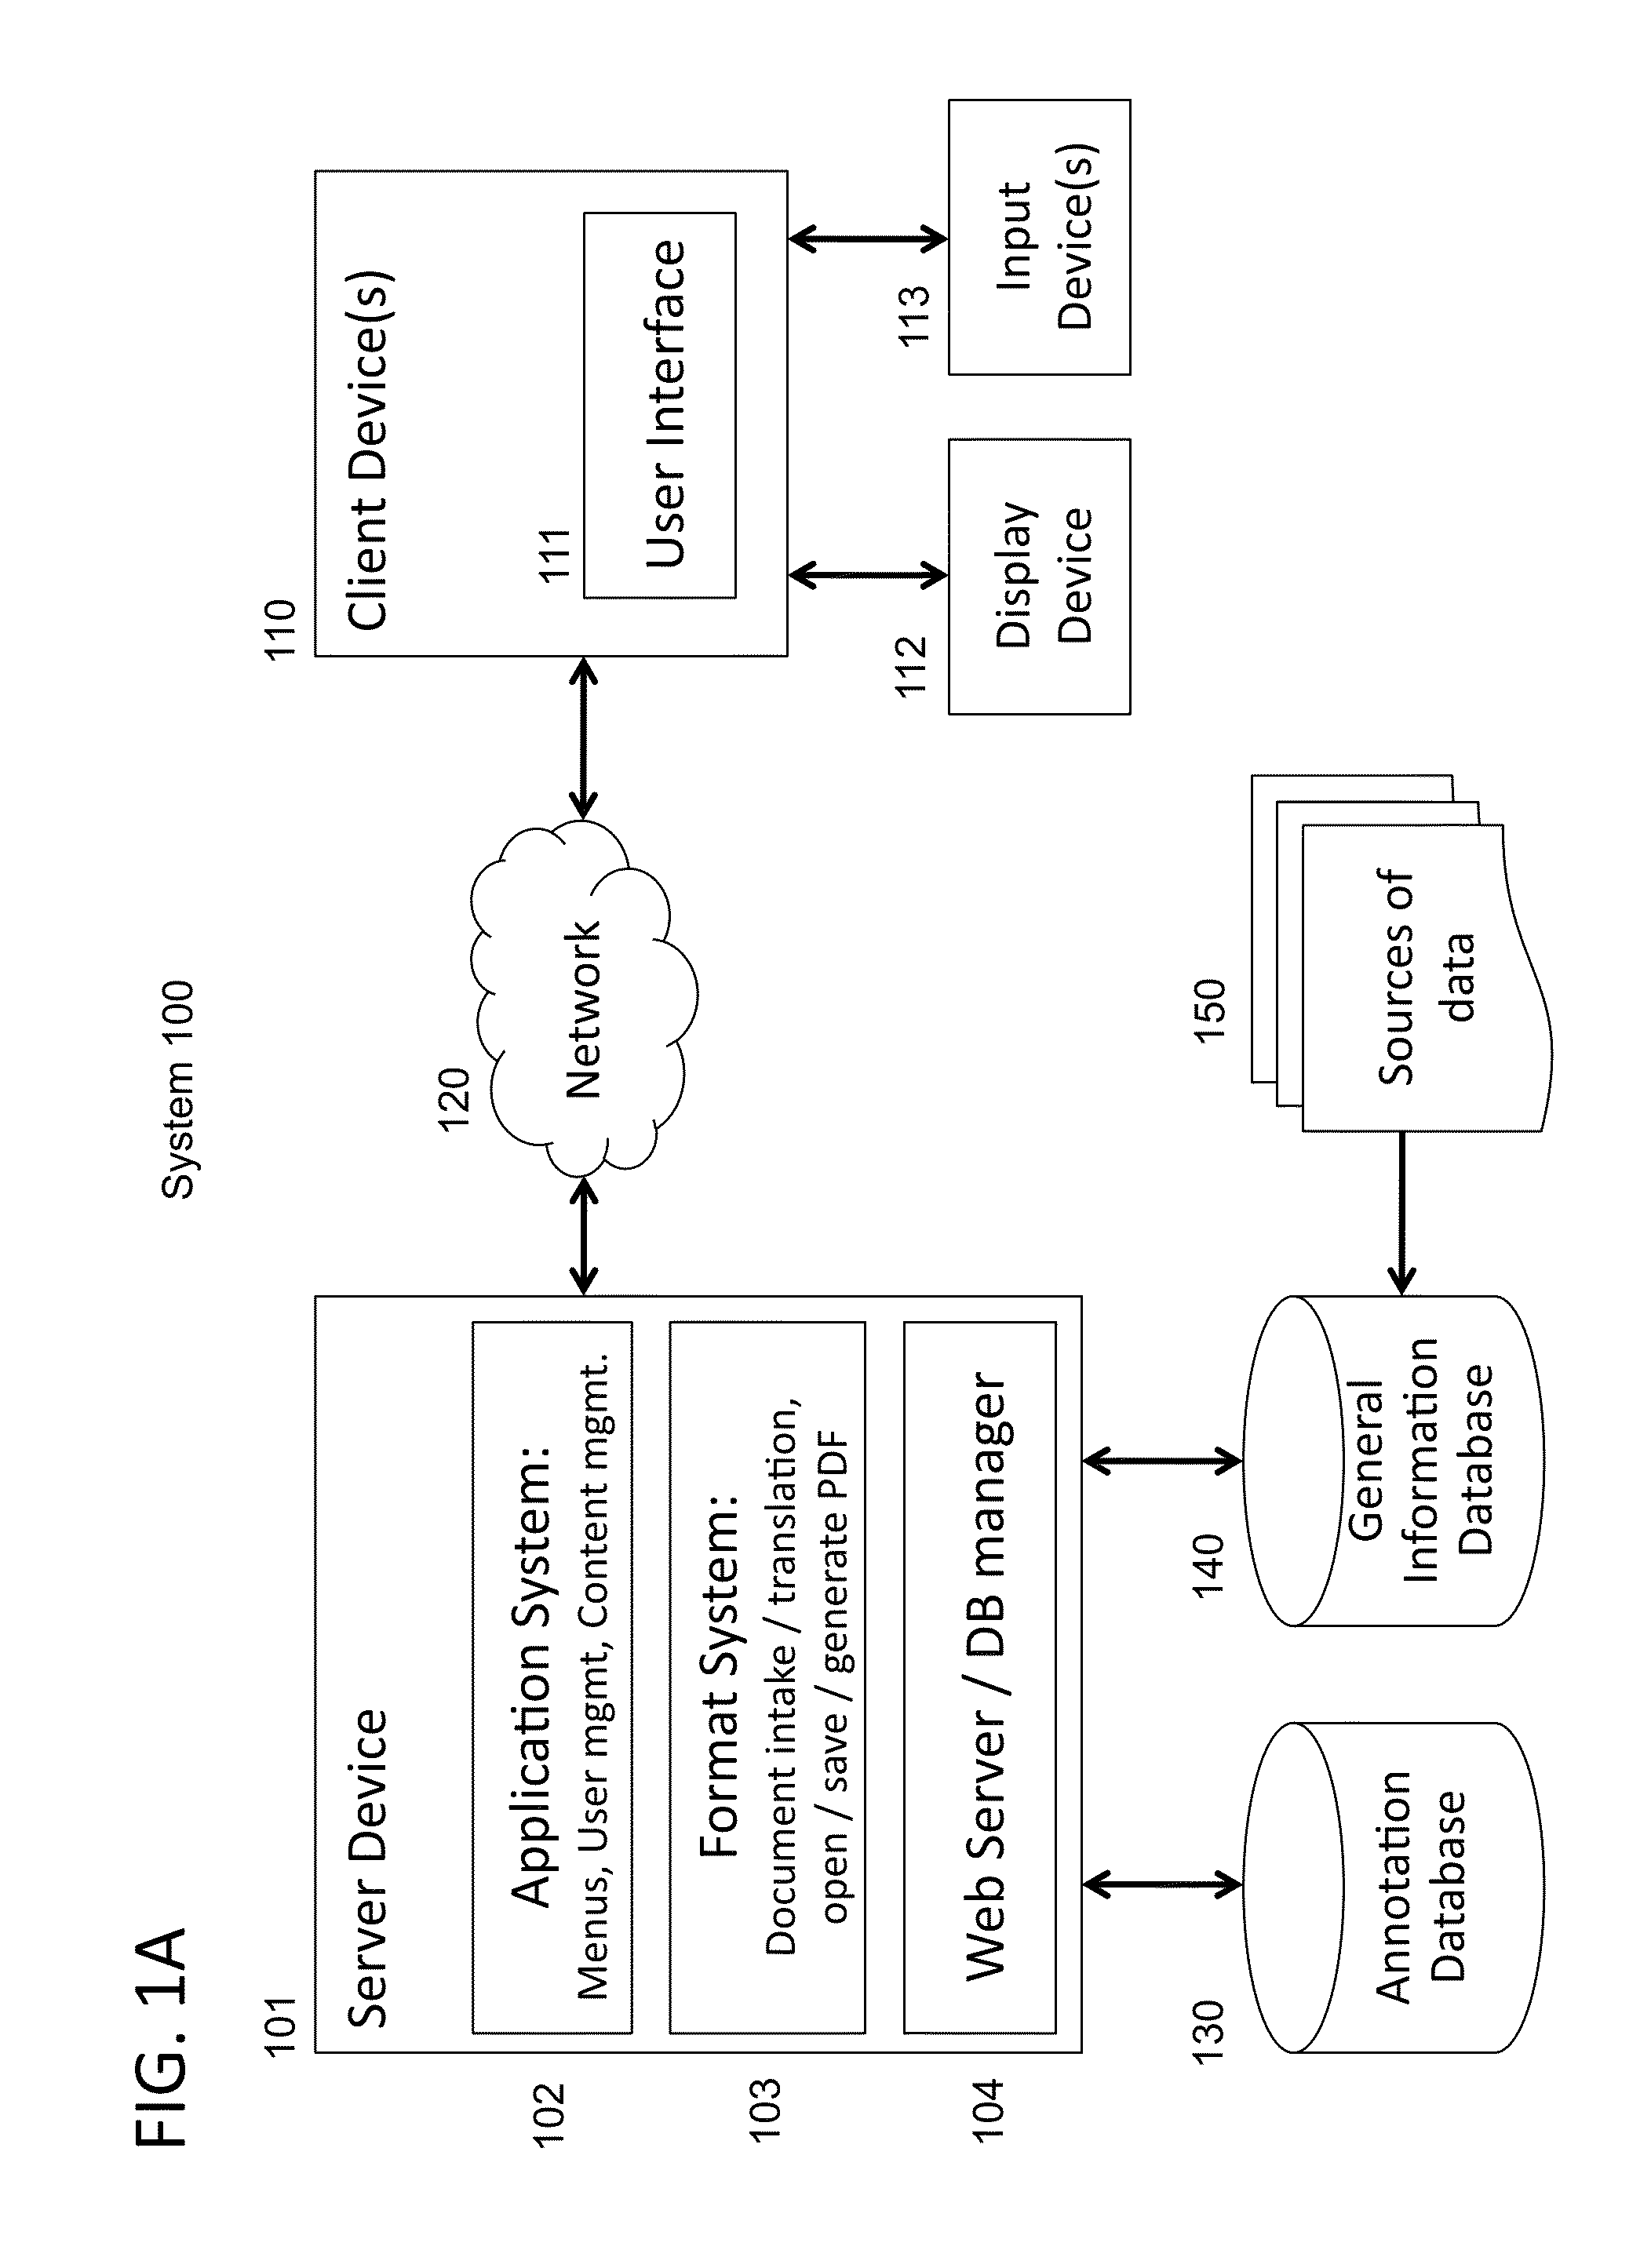 Method of annotating portions of a transactional legal document related to a merger or acquisition of a business entity with graphical display data related to current metrics in merger or acquisition transactions